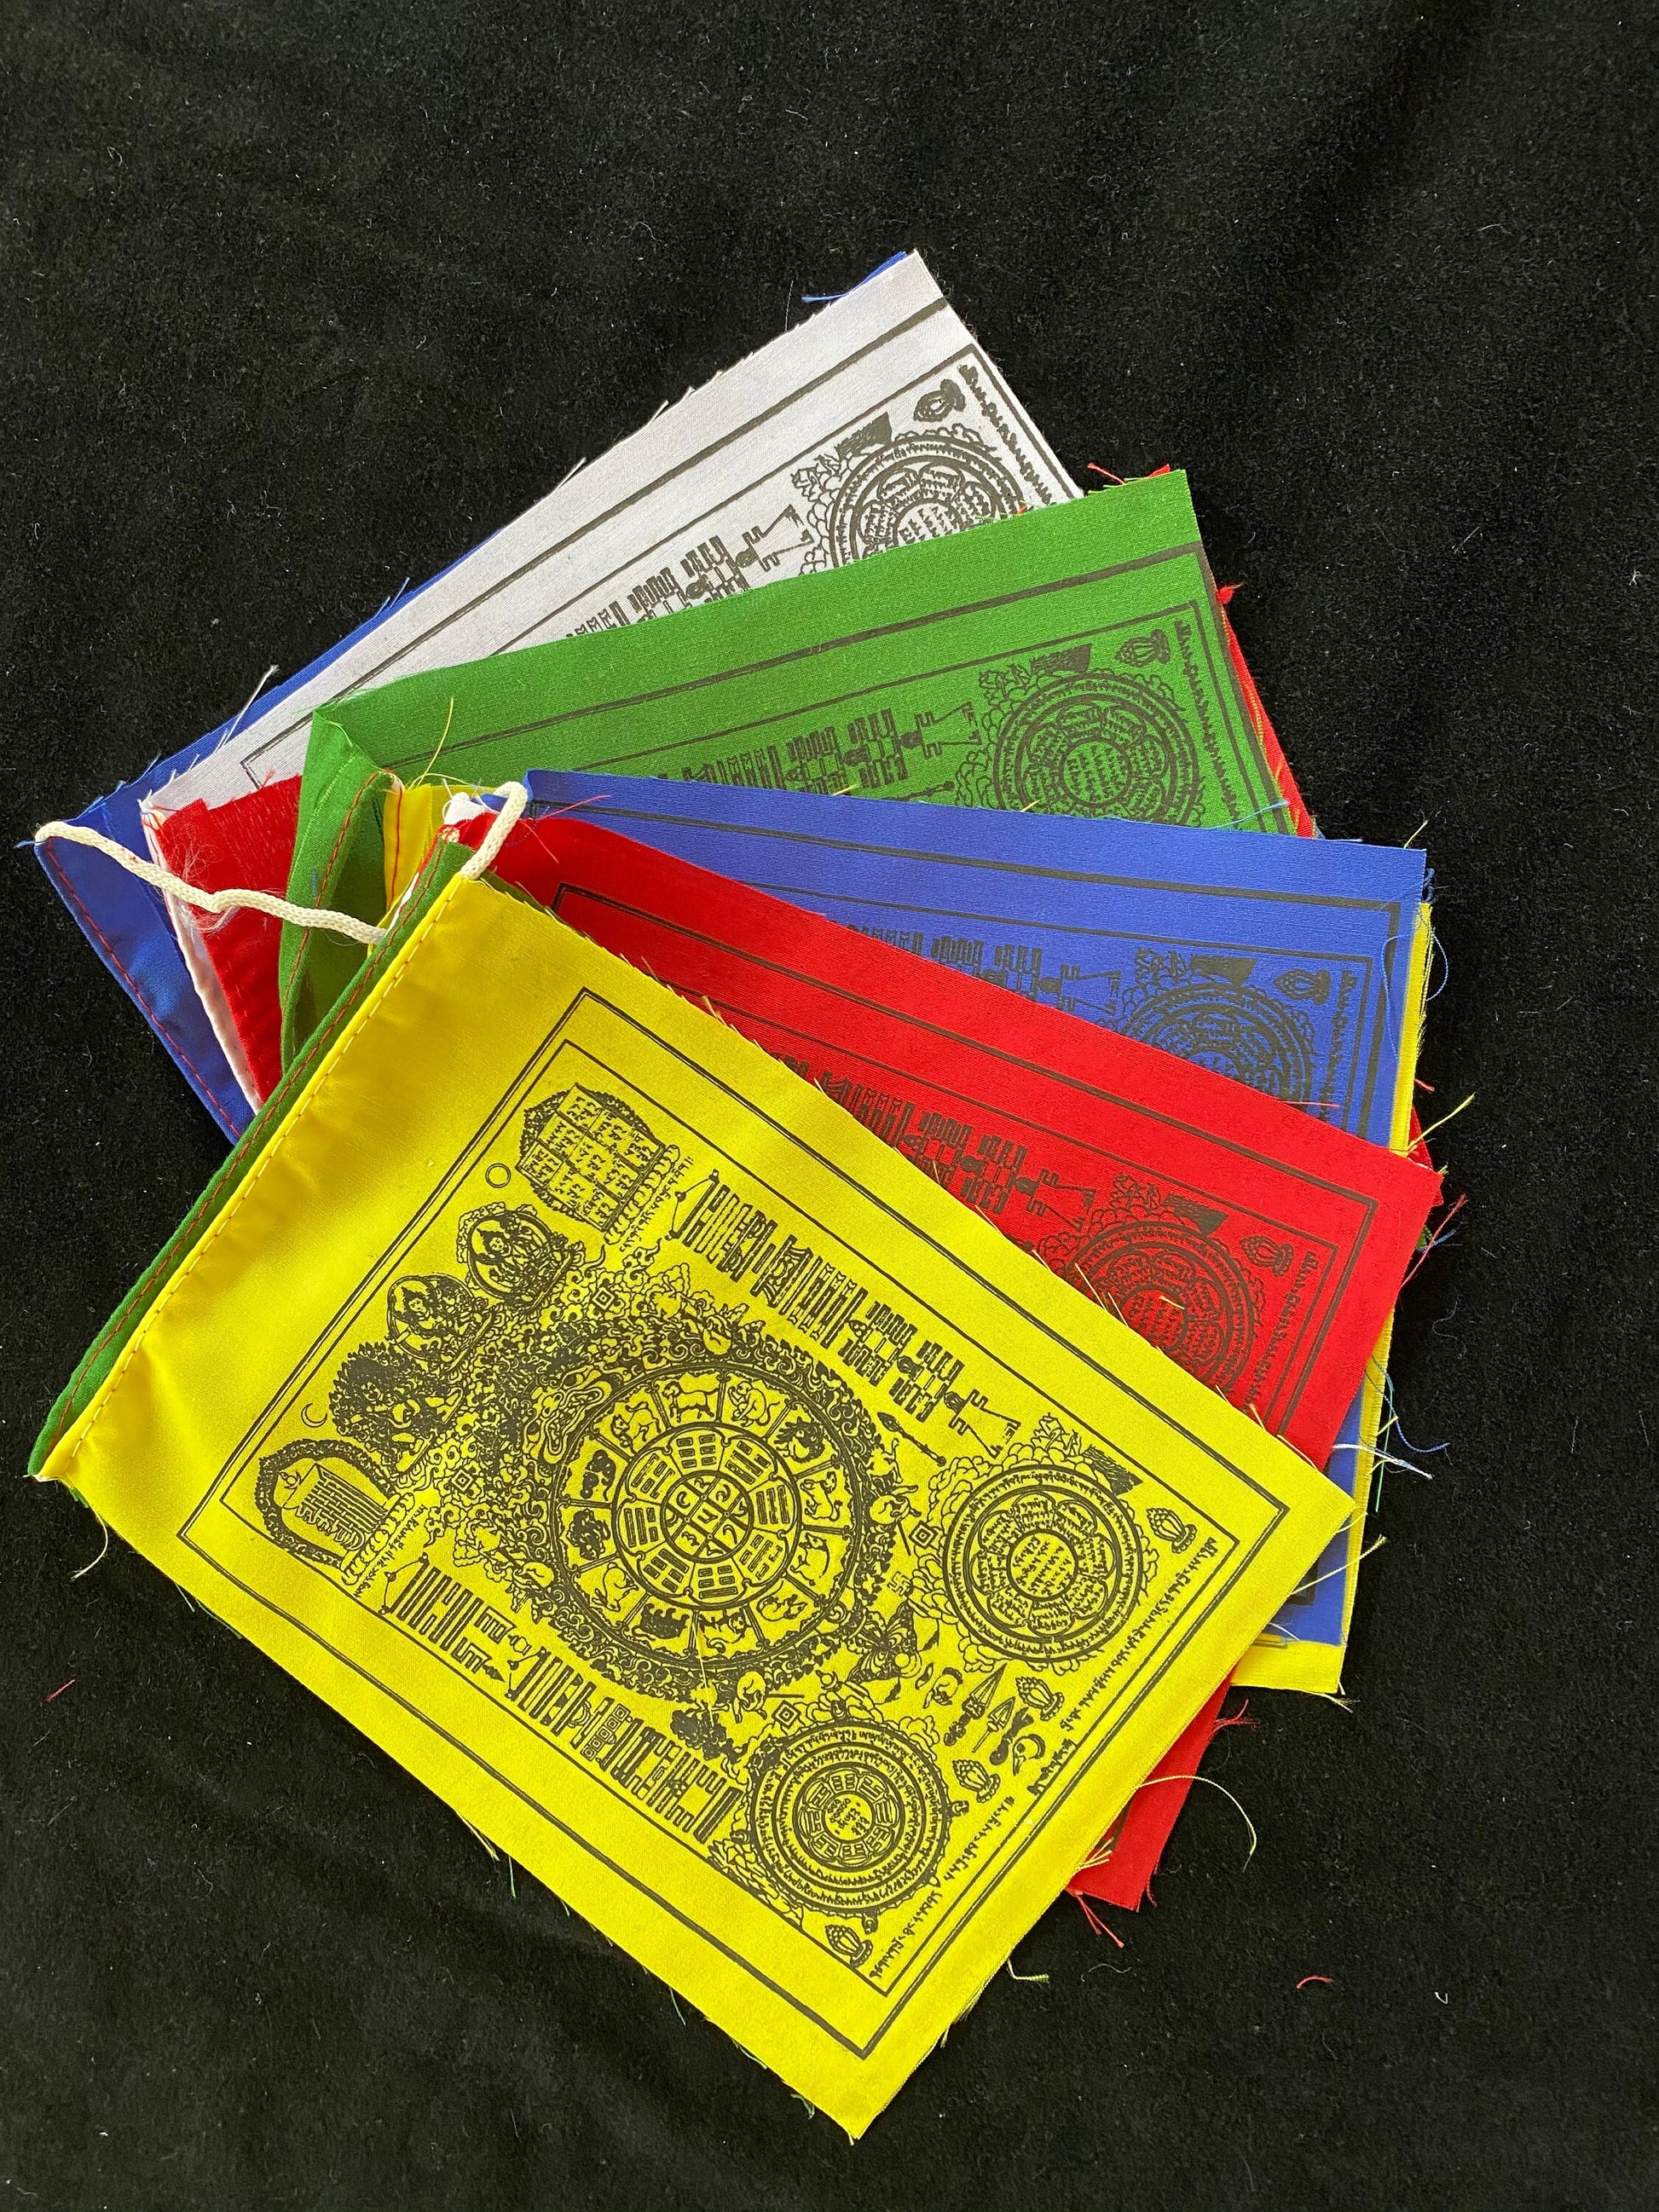 set of 6x7.5 inch Wheel of life prayer flags in 5 colors splayed out against a black background